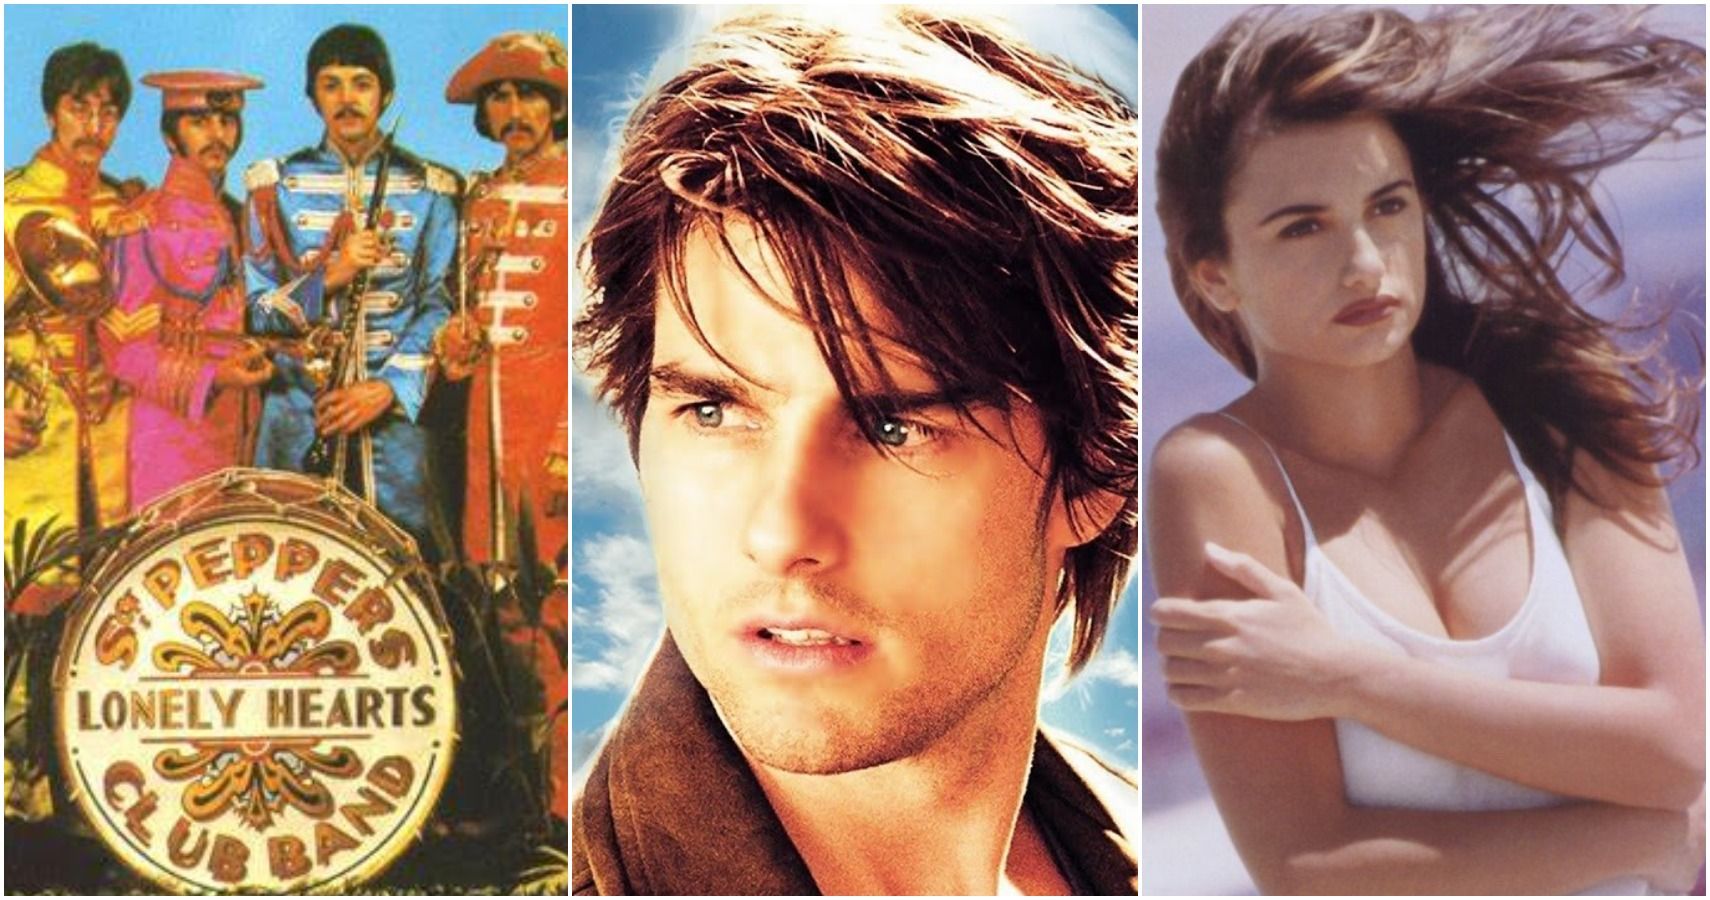 10 Things You Didn’t Know About Vanilla Sky